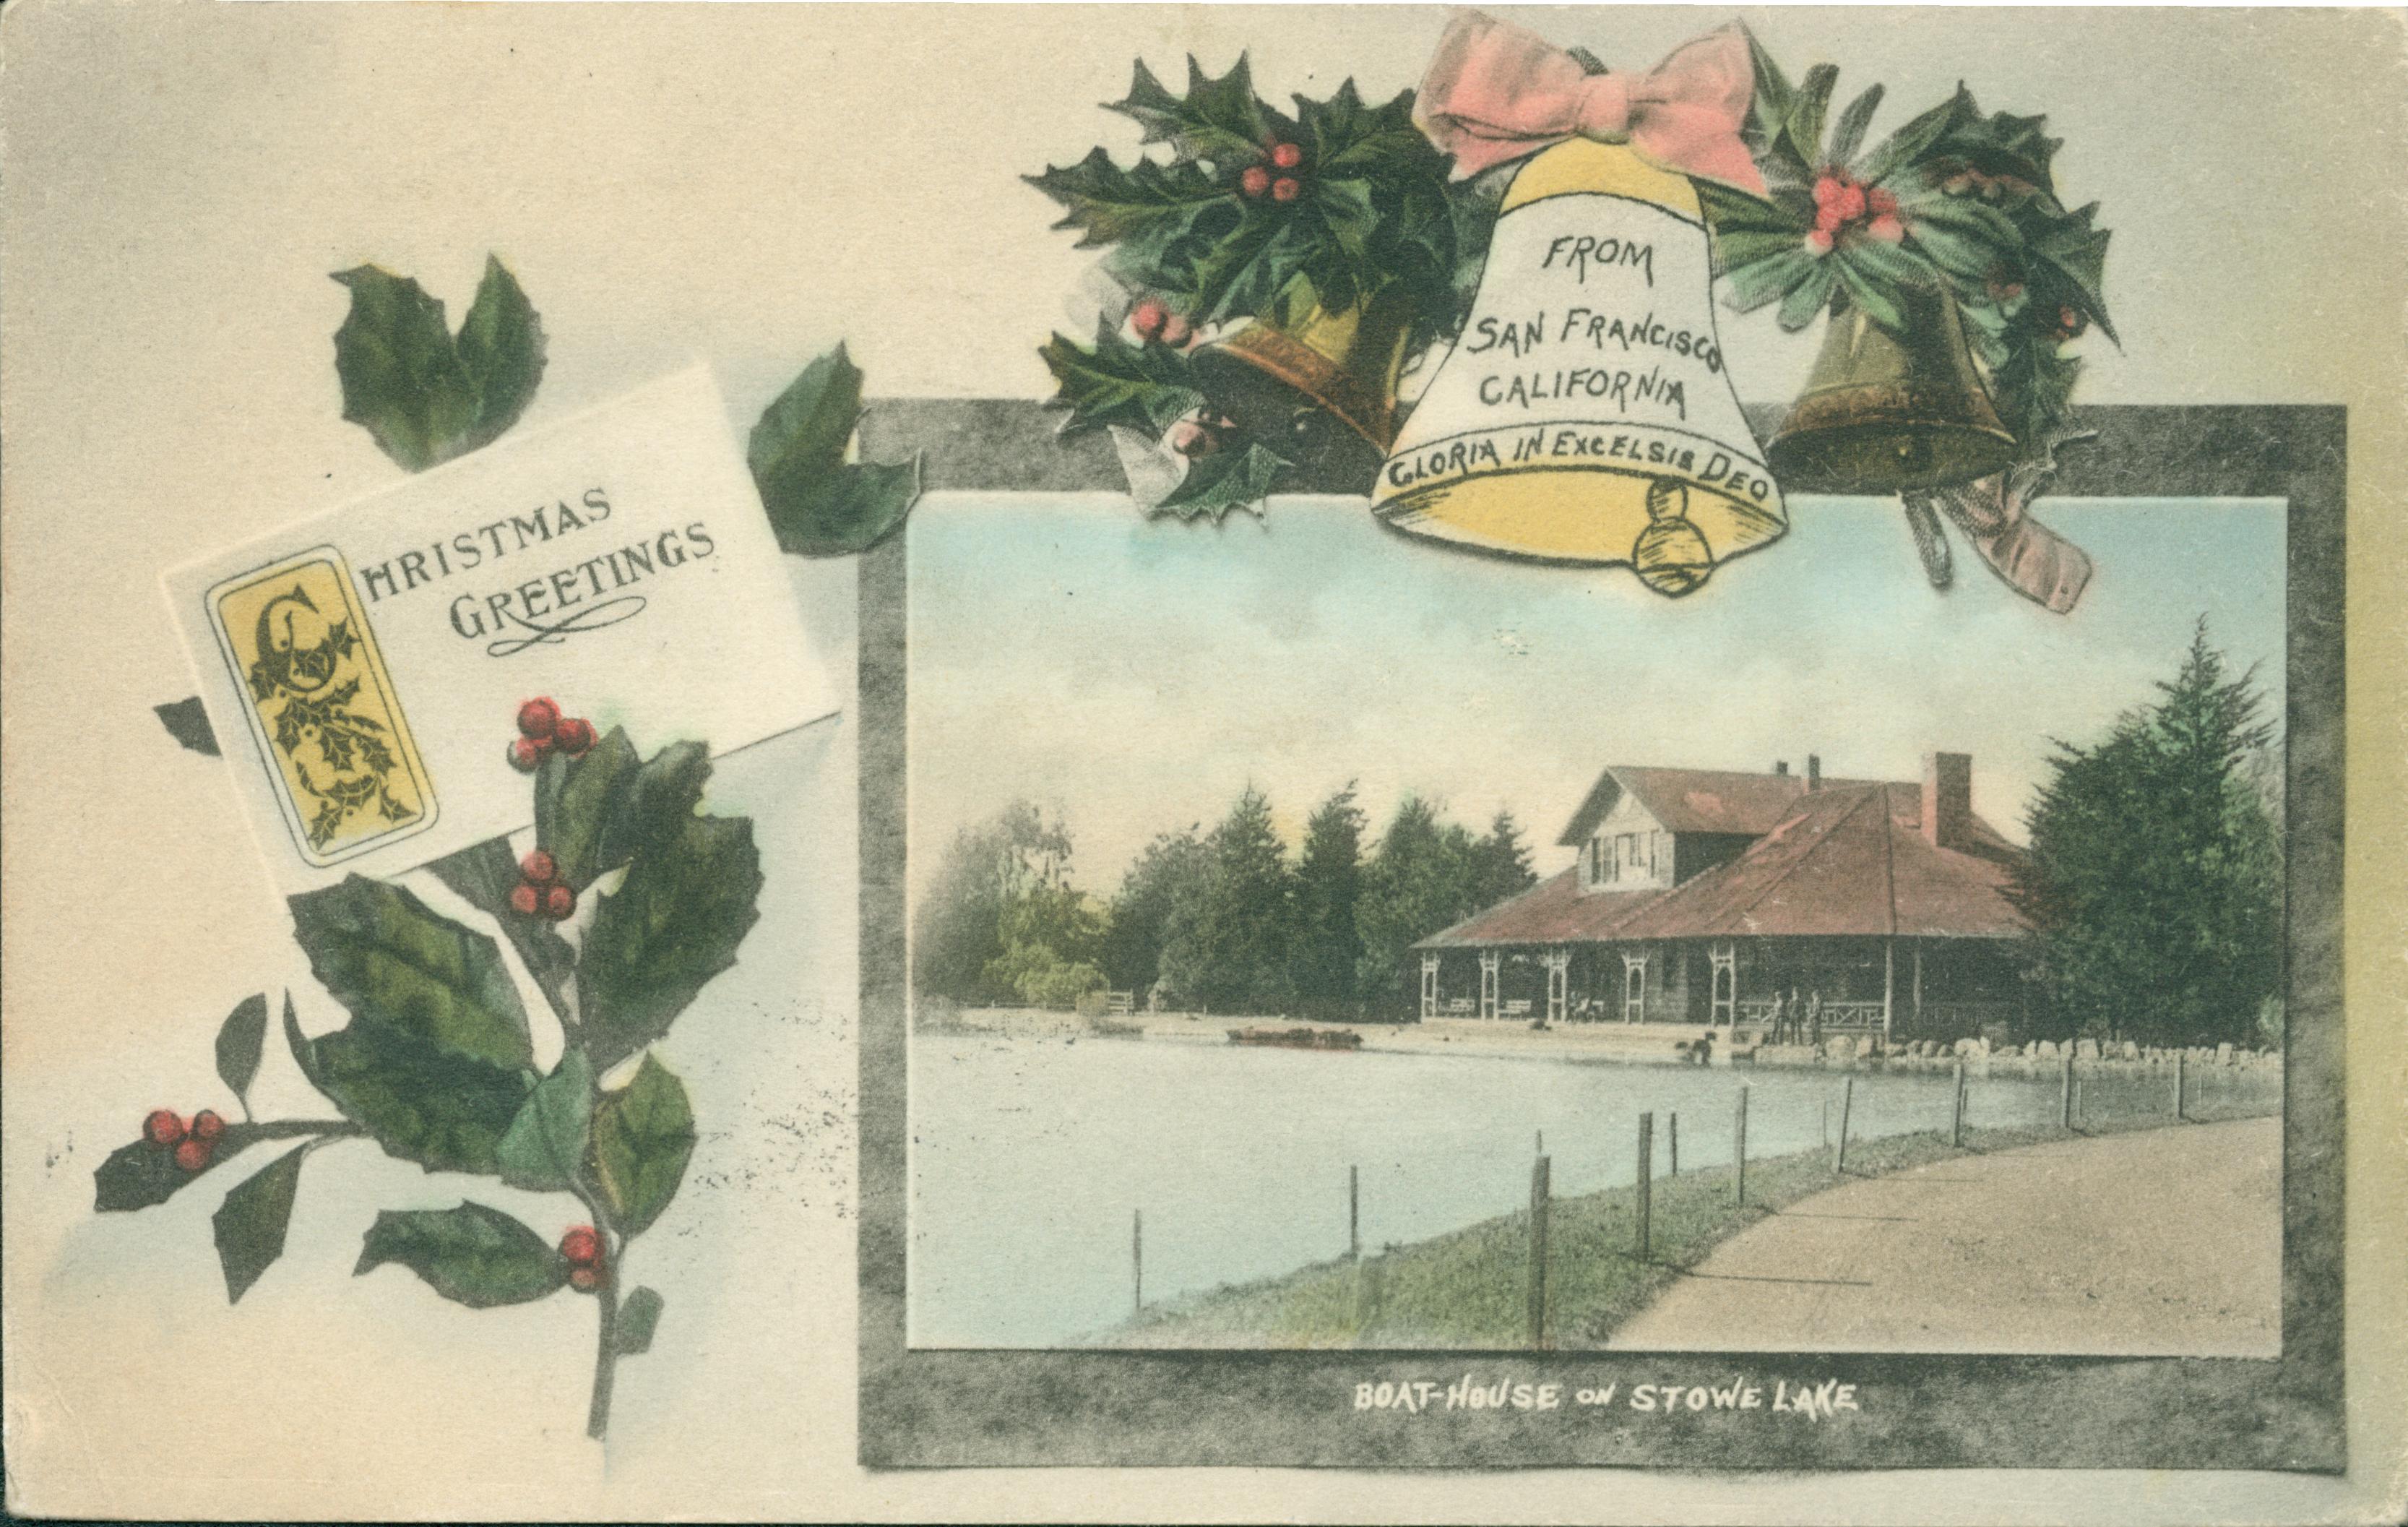 This postcard shows the boat-house on Stowe Lake, framed by bells and holly